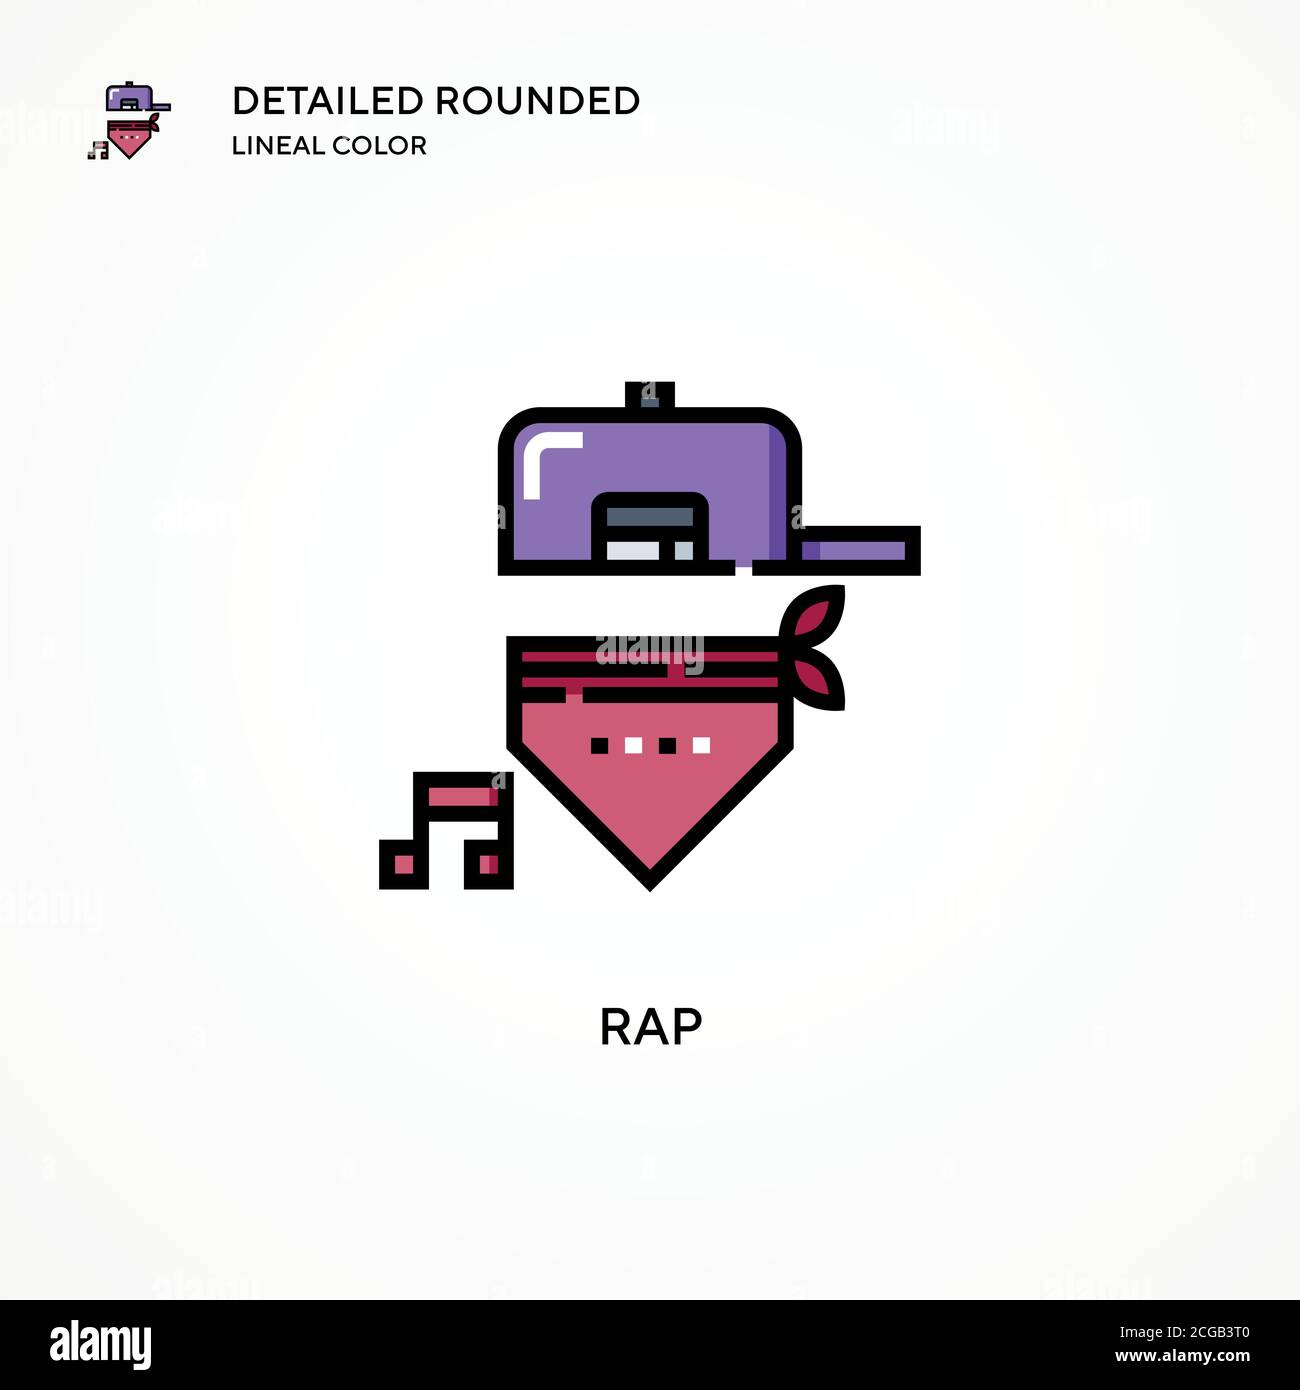 Rap vector icon. Modern vector illustration concepts. Easy to edit and customize. Stock Vector